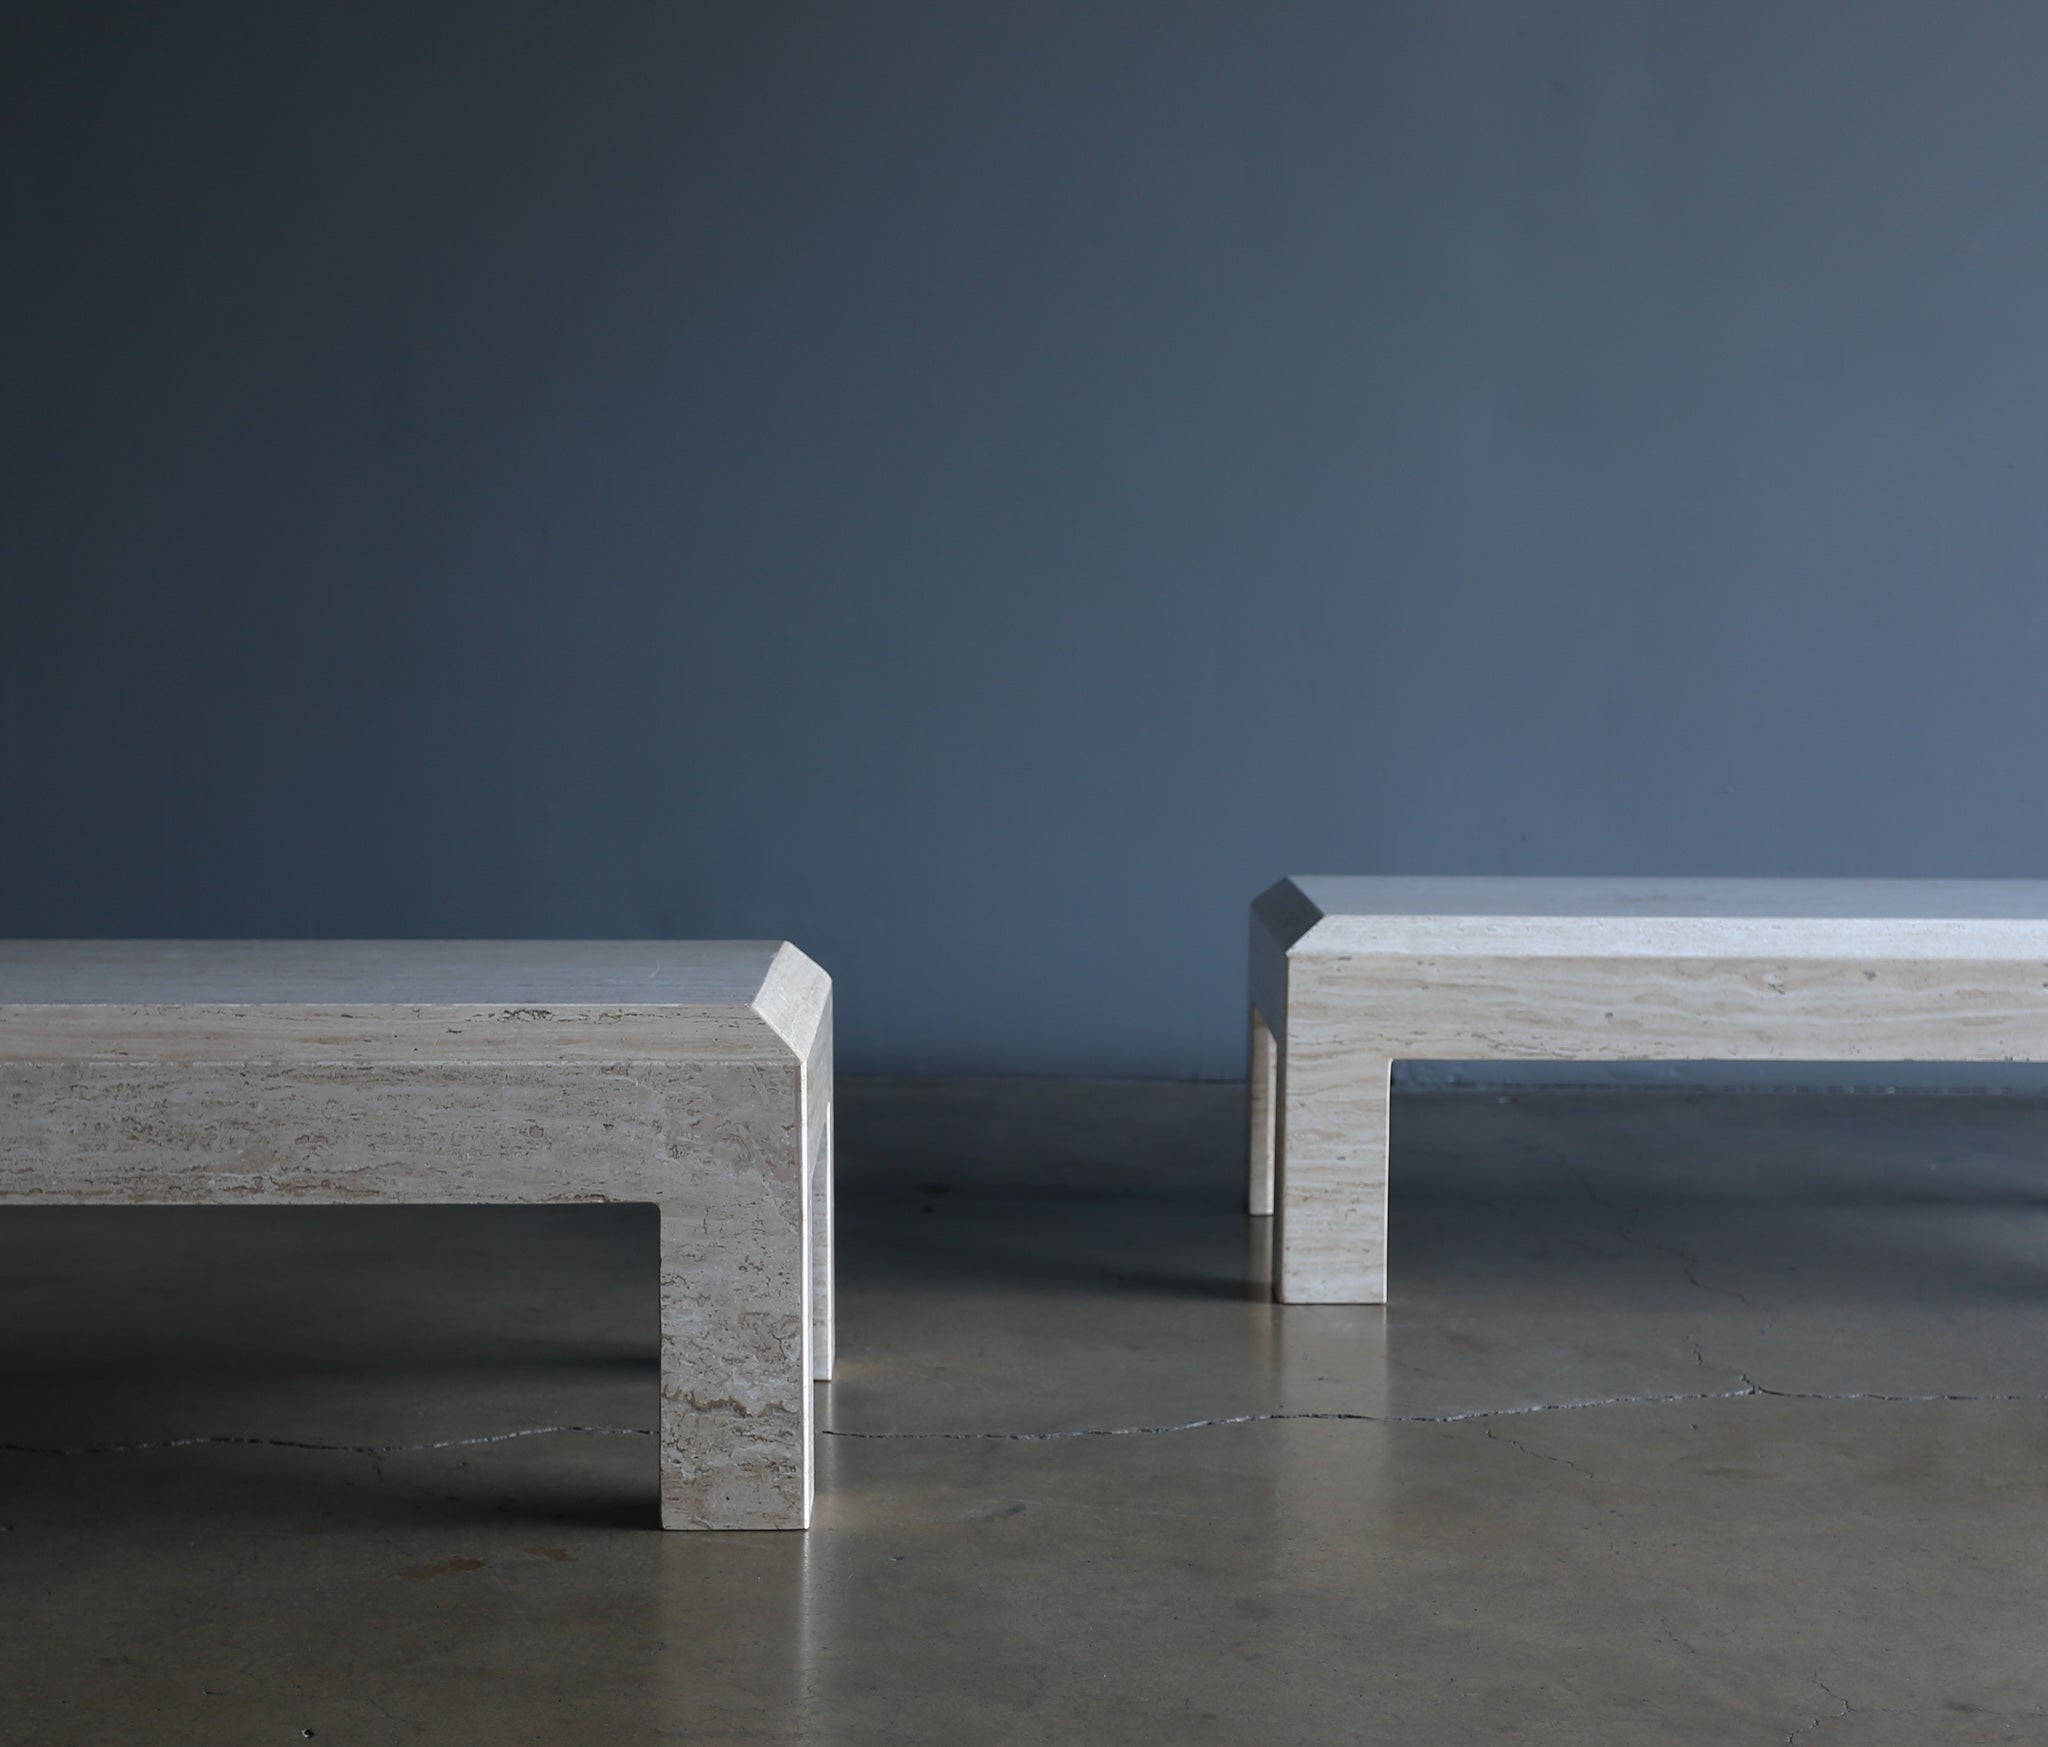 = SOLD = Travertine Pair of Large Scale Side Tables / Coffee Tables, Italy, c. 1980